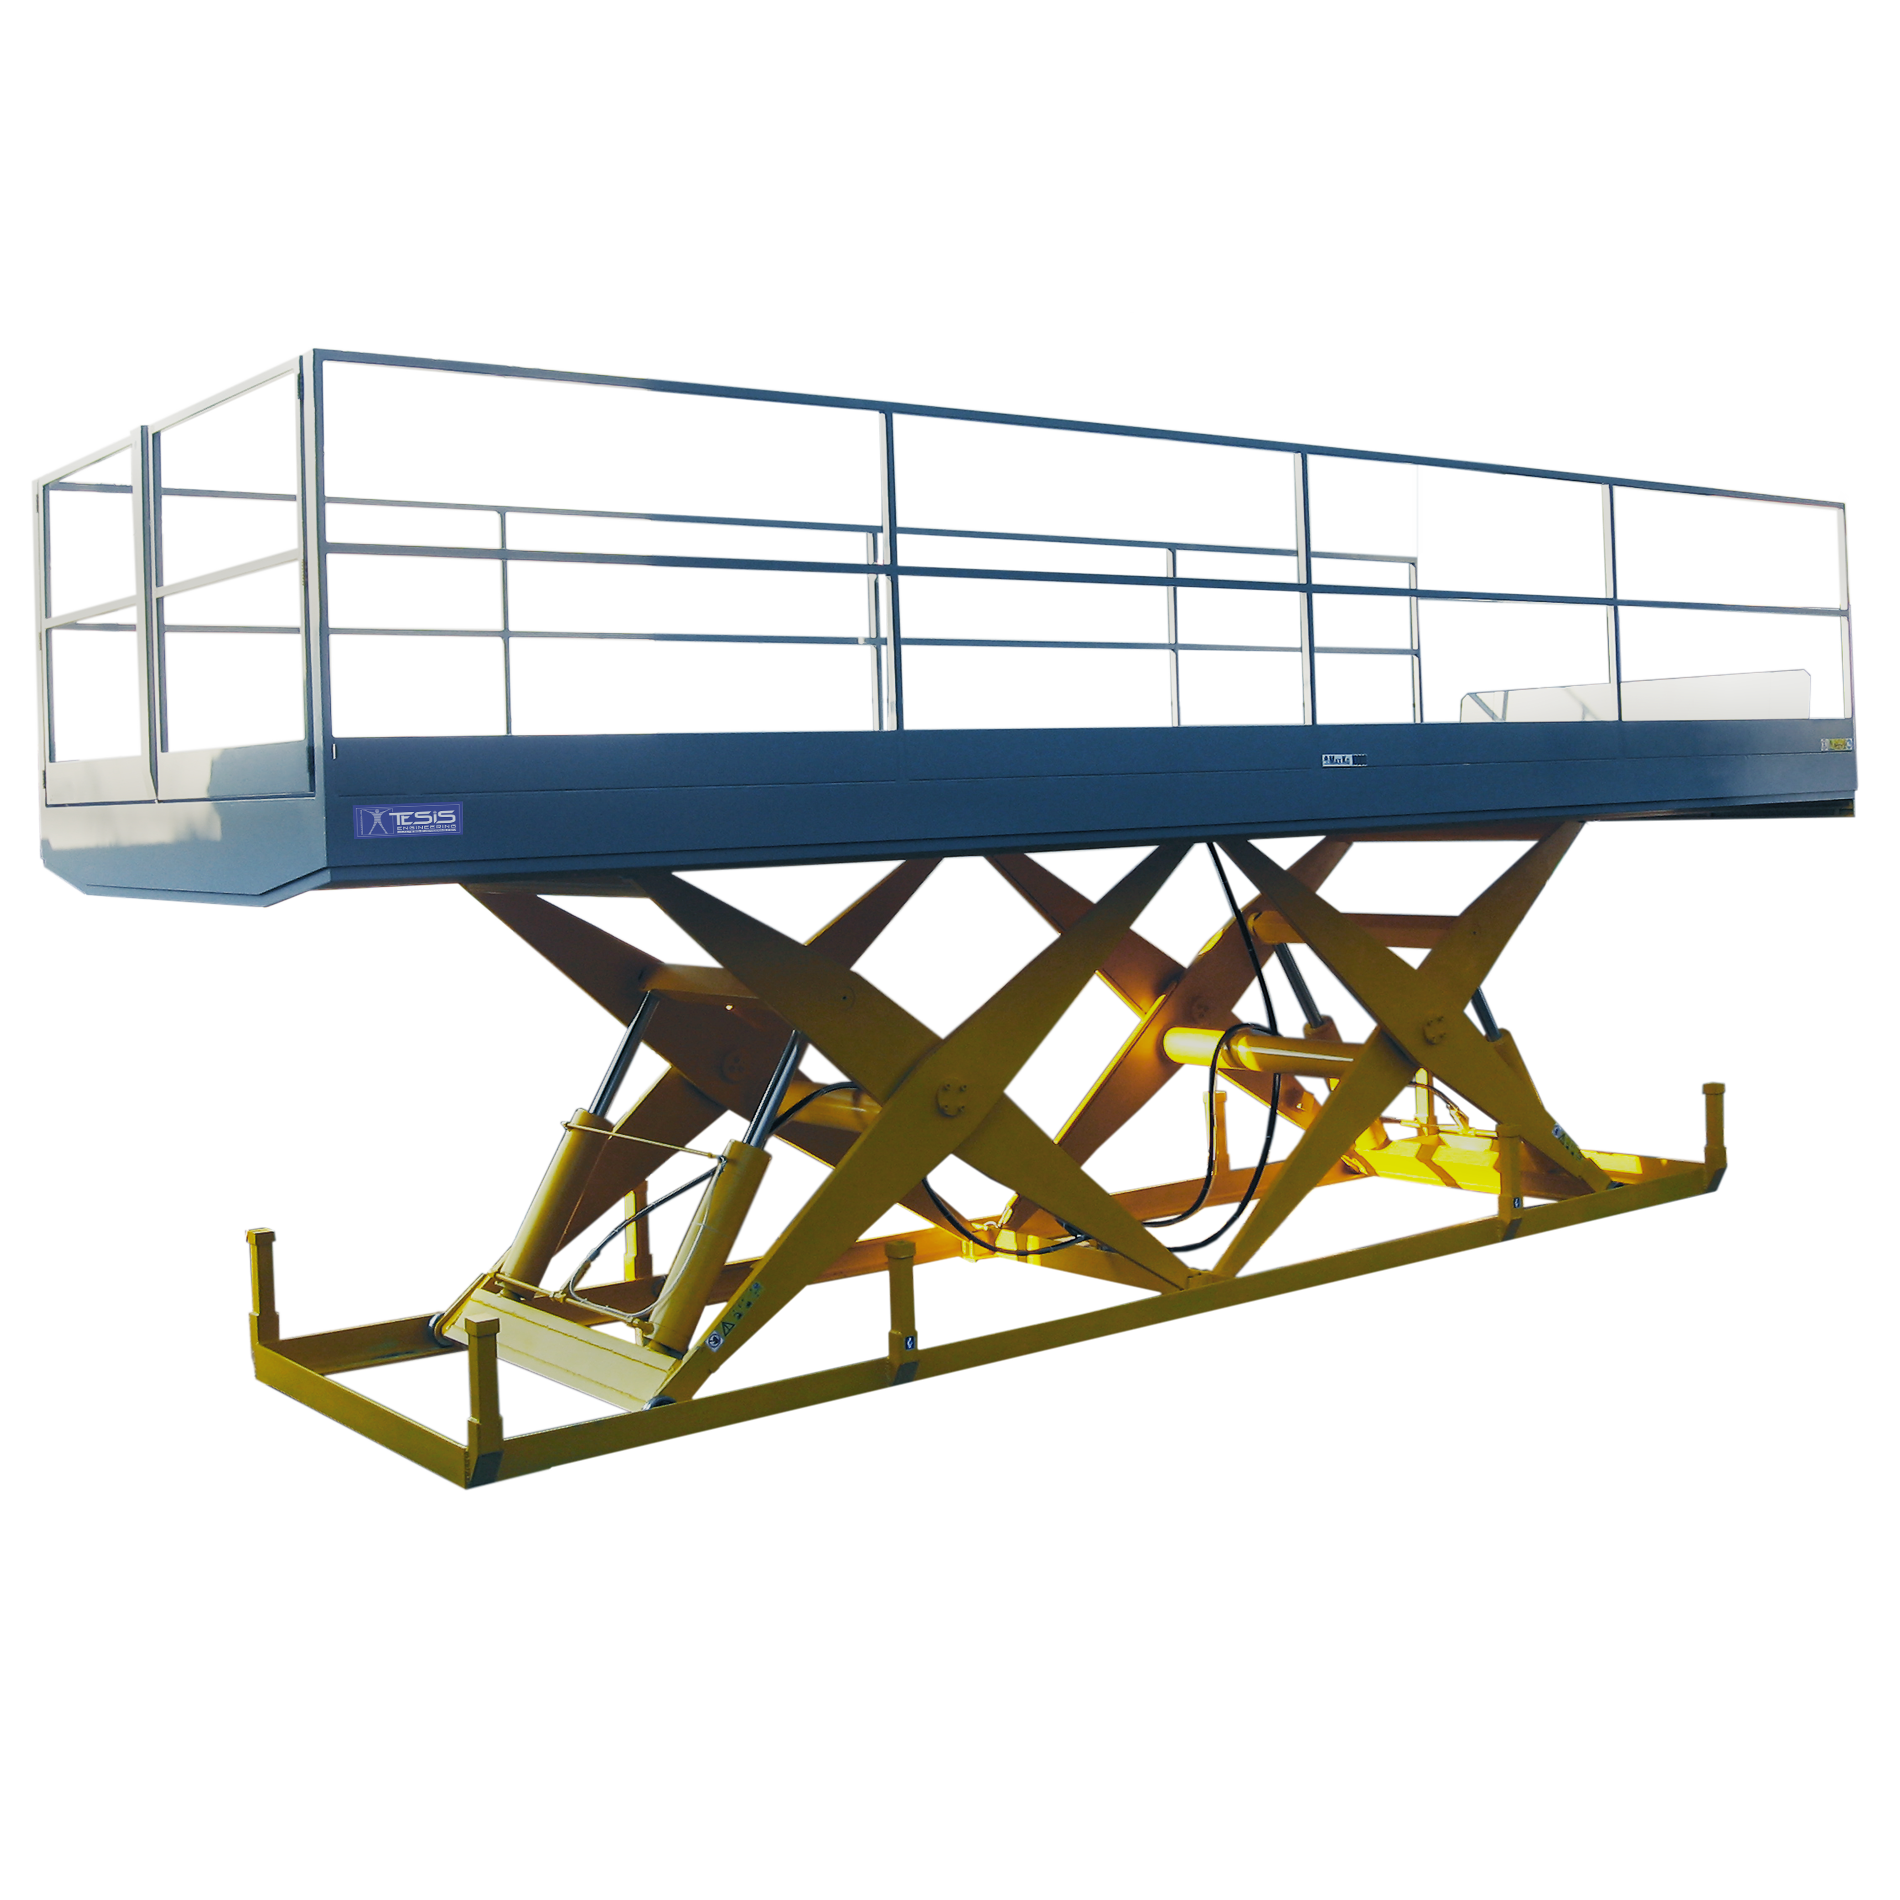 Lifting table for loading and unloading trucks with motorized approach ramp guardrails, lifting platforms for loading vehicles, loading dock lifts, loading dock lift tables, truck loading platform lifts, scissor dock lifts, scissor lift dock levellers